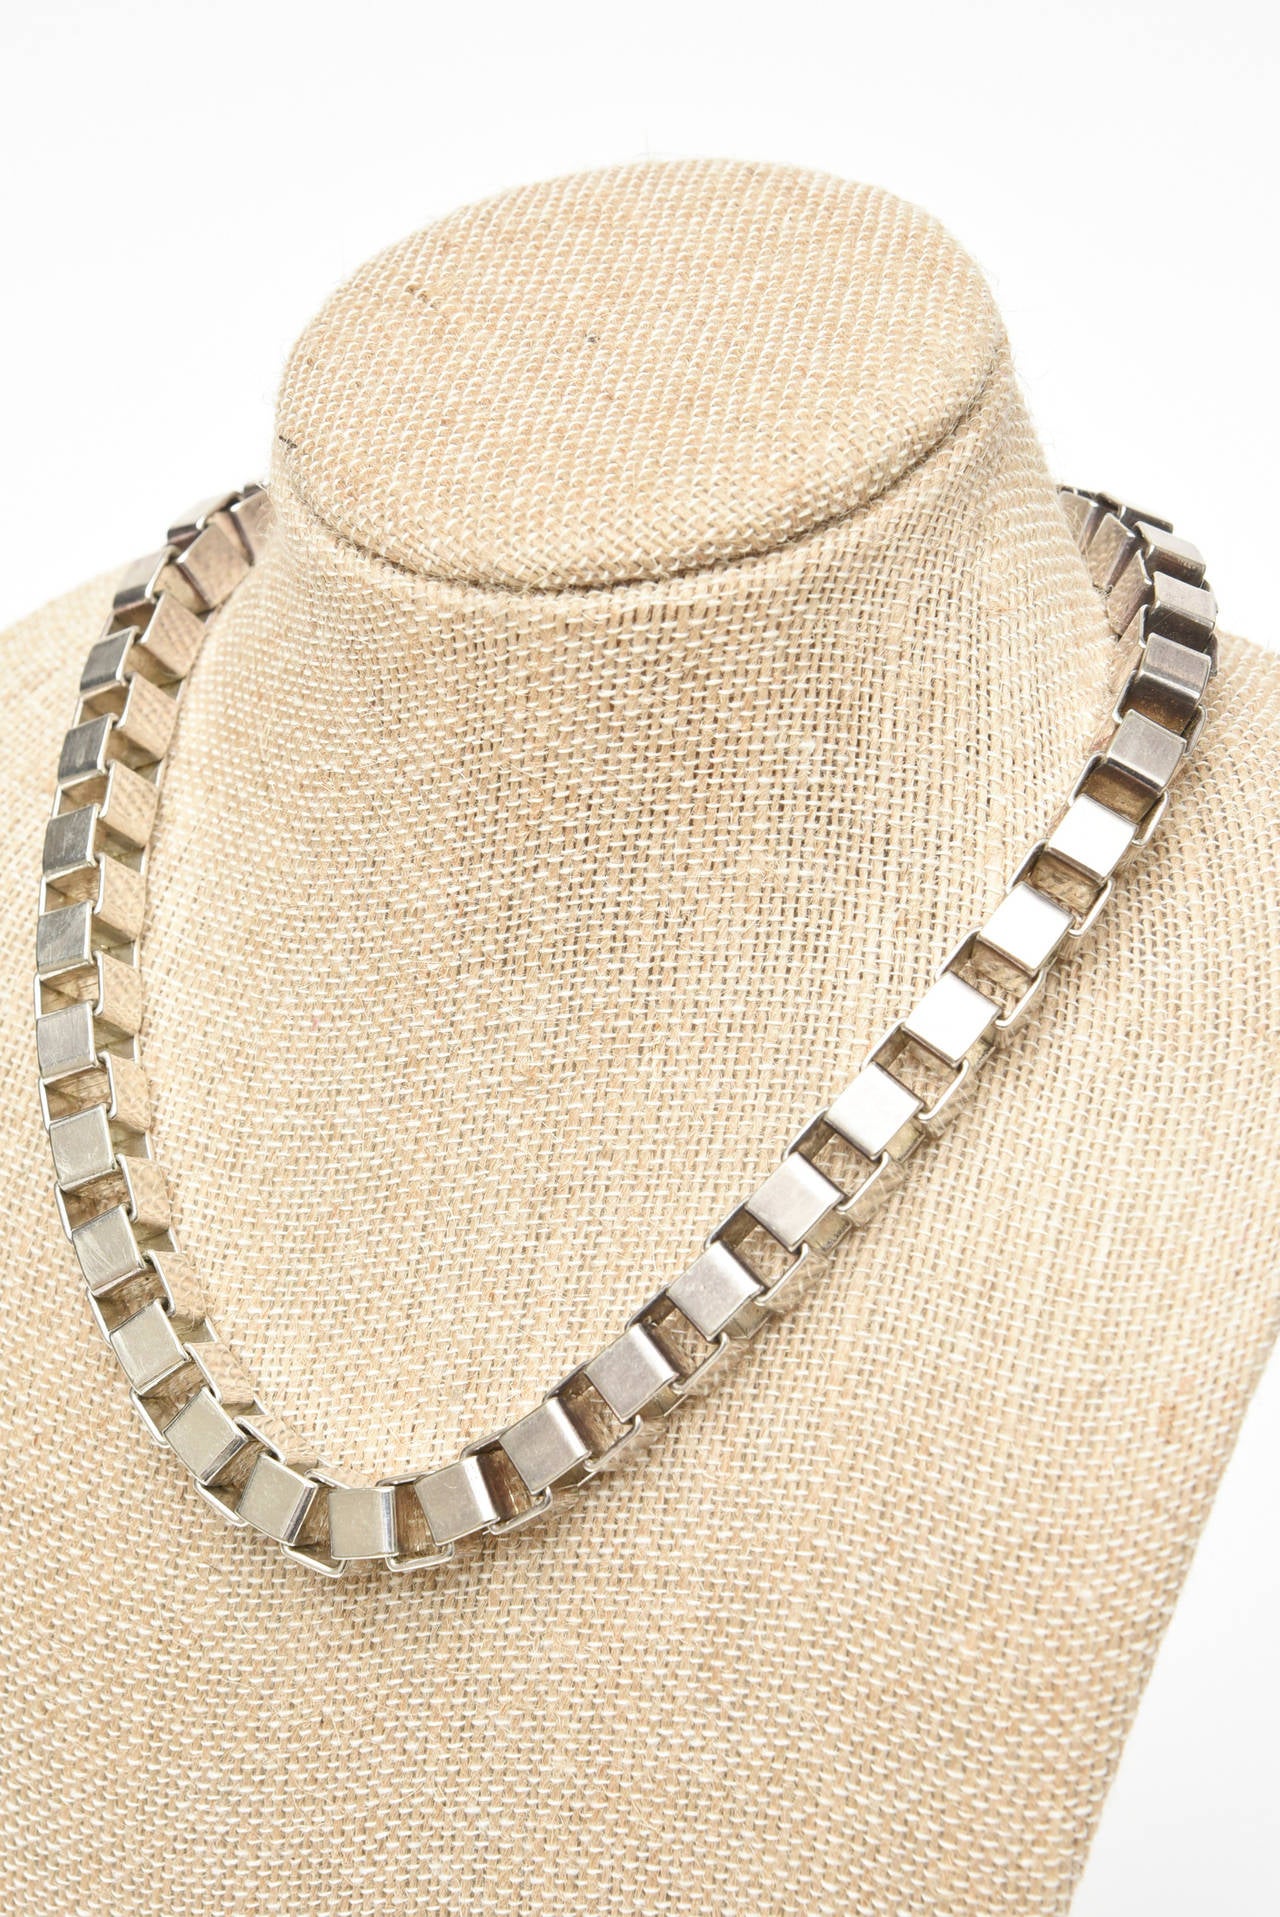  Vintage Sterling Silver Interlocking Geometric Cube Necklace Italian For Sale 1